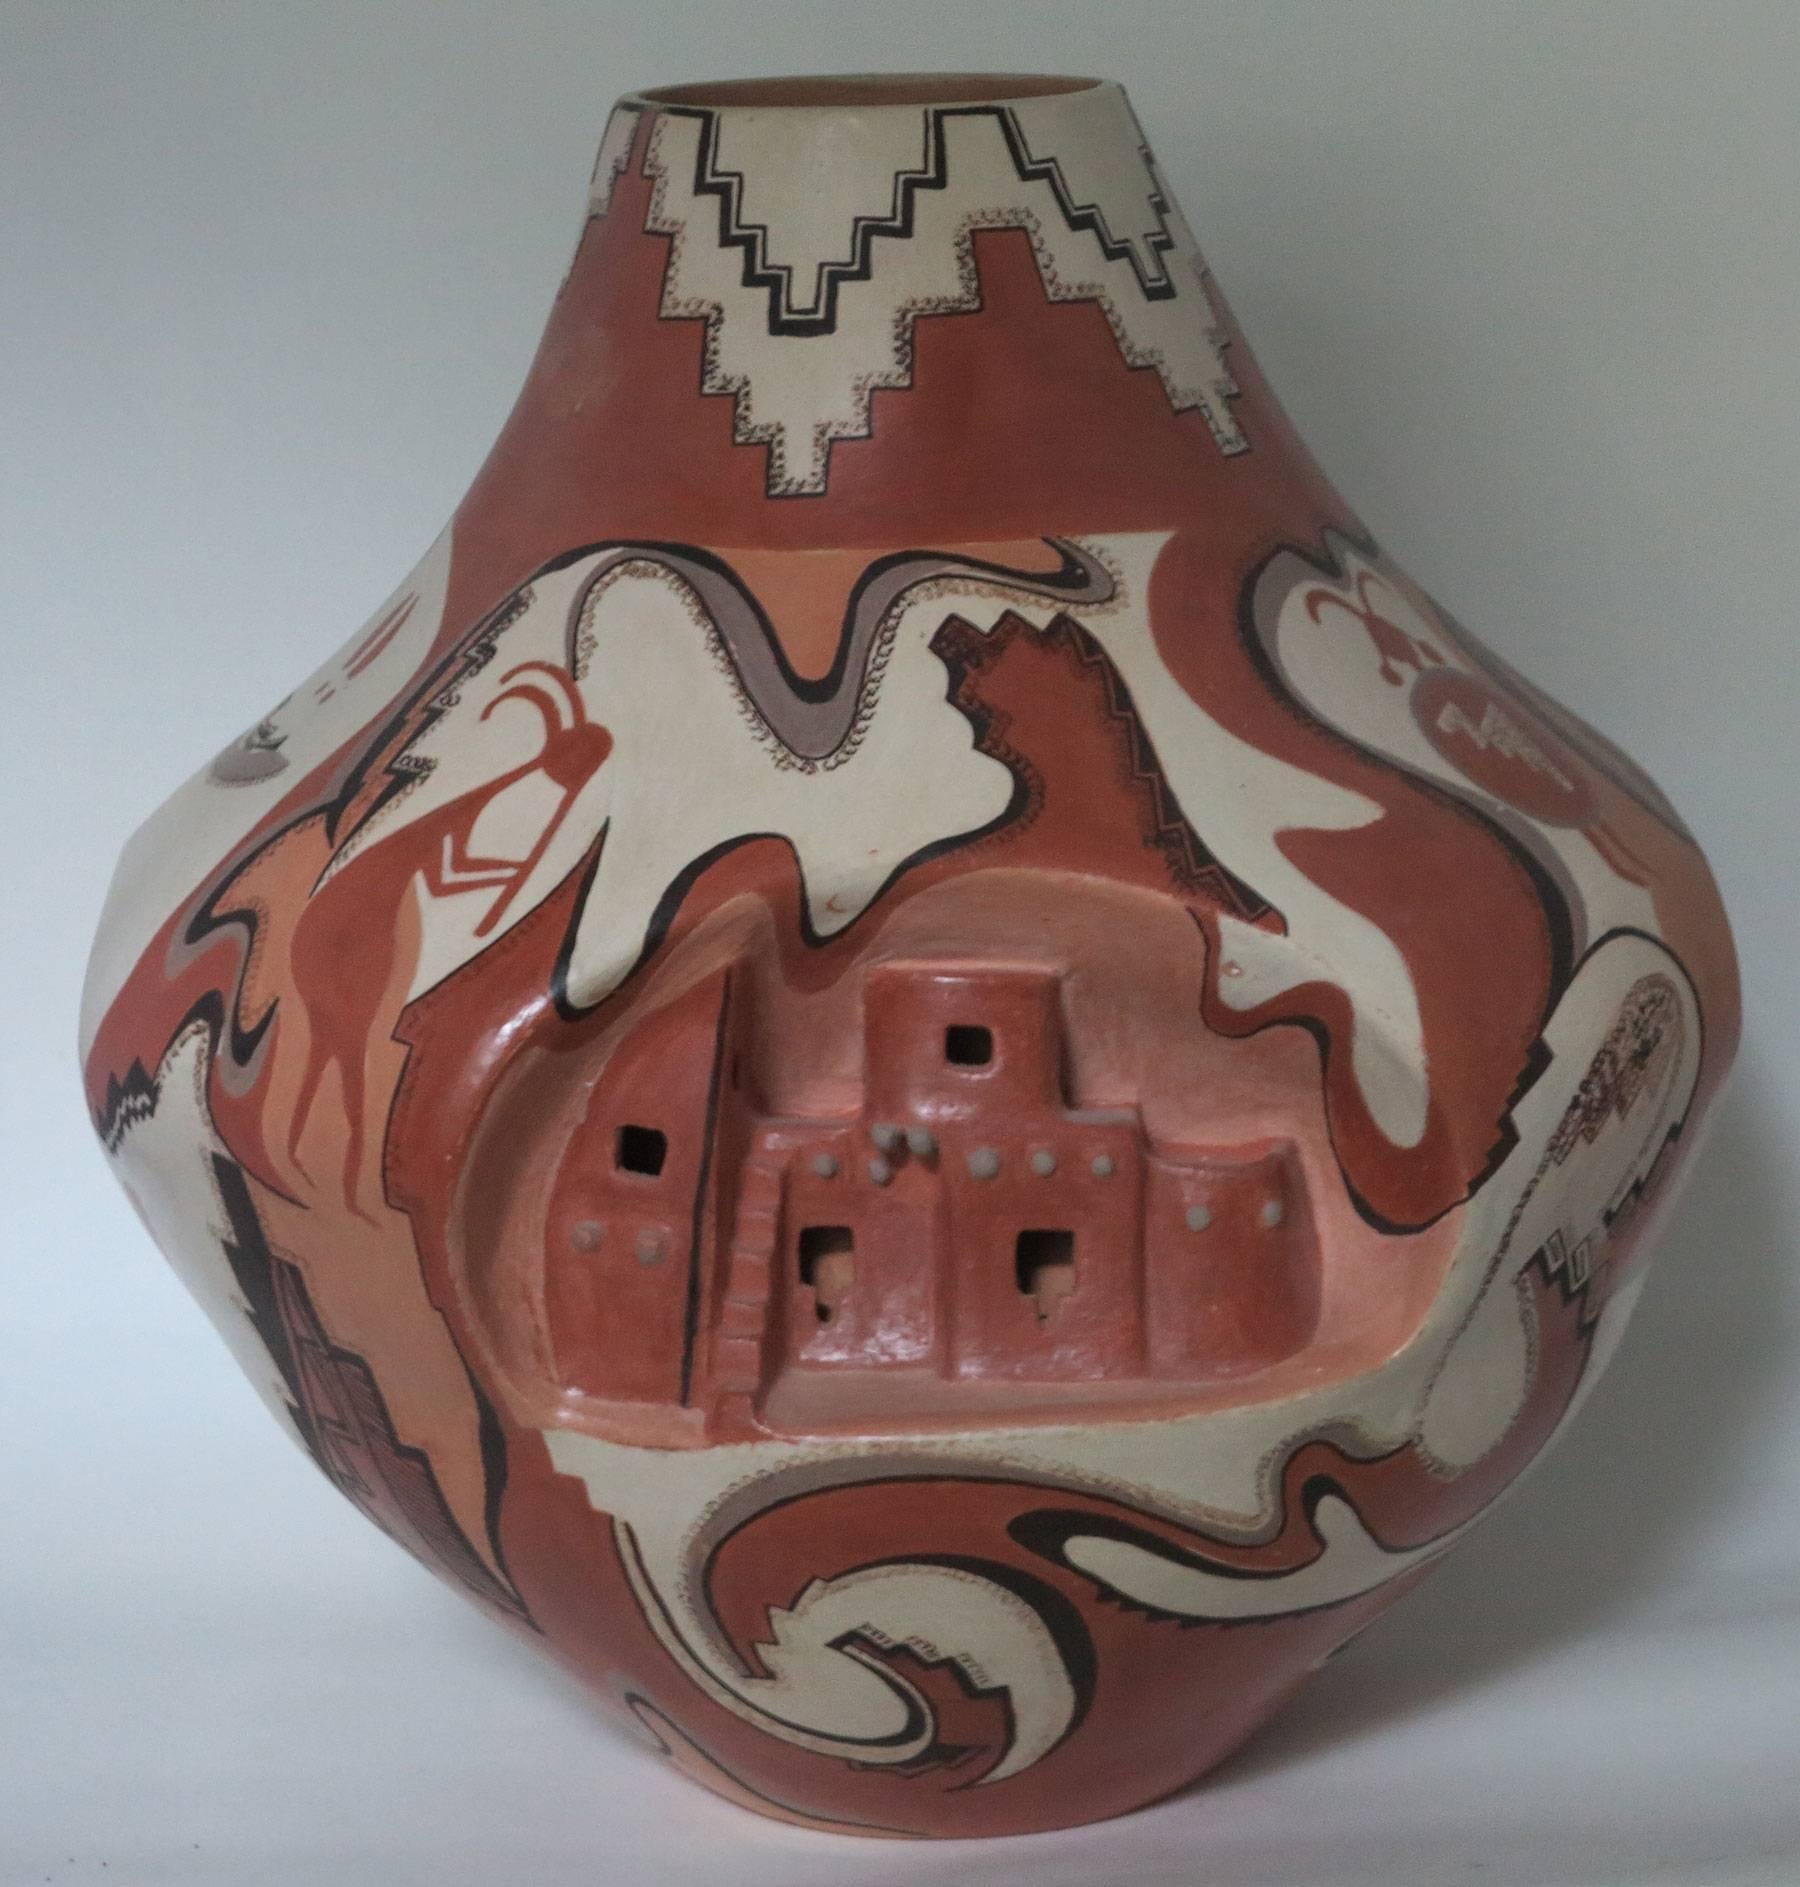 Large and important pottery vase by Native American Artist Lucy Leuppe McKelvey. Beautifully executed depicting traditional cliff dwellings and other ancient symbols of the Native American tribes. Measures: Approximate 13 inches high with a 14 inch